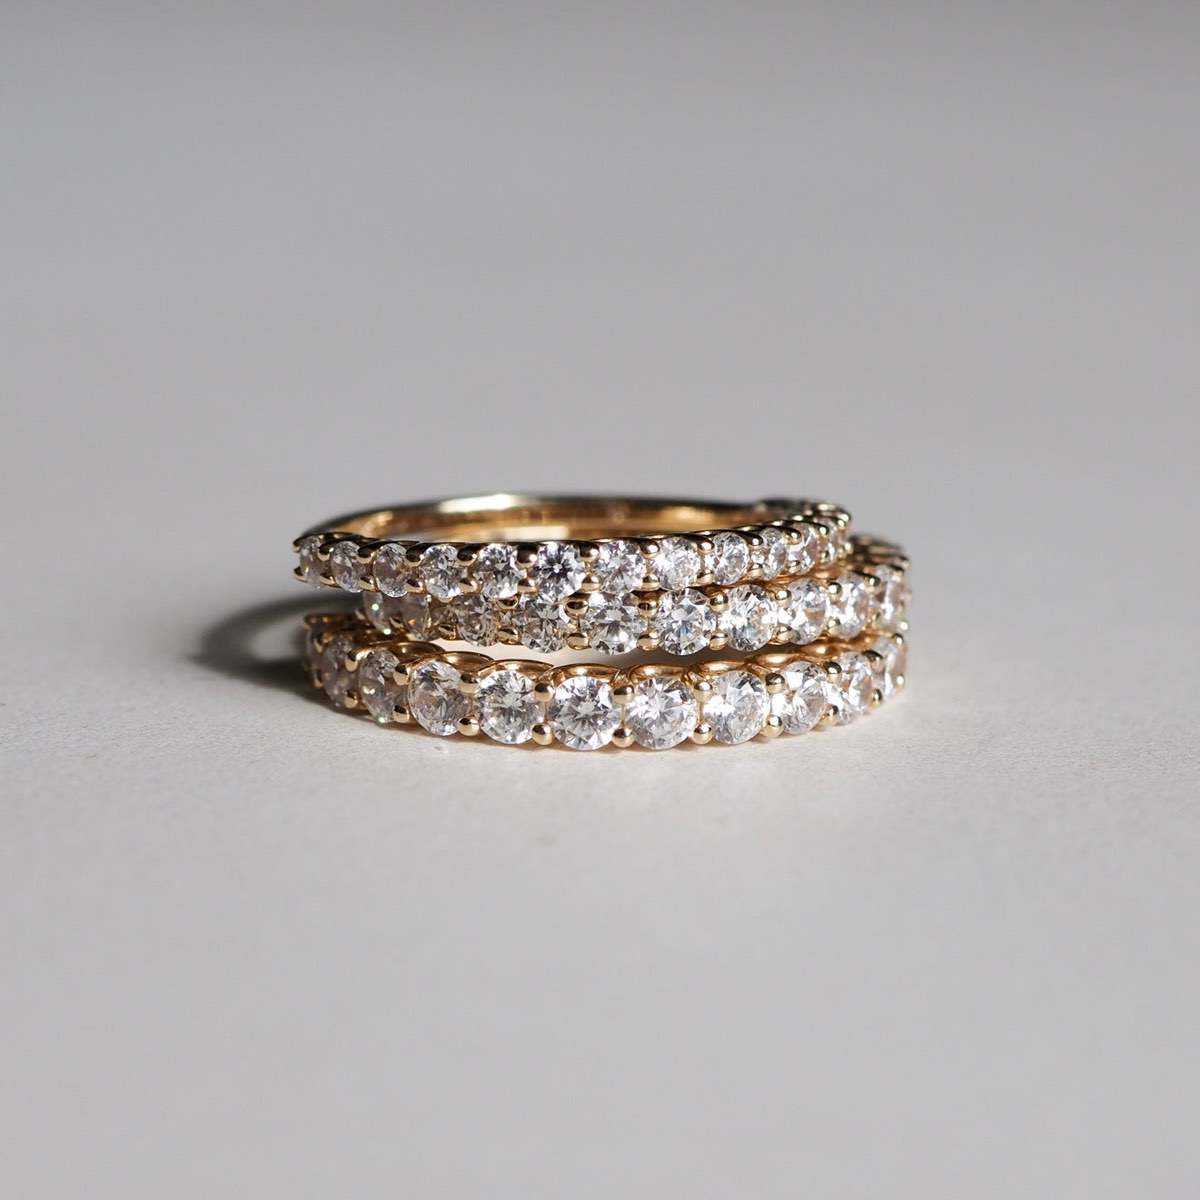 Stack of our Arraya diamond rings featuring our 2mm, 2.5mm and 3mm diamond bands 